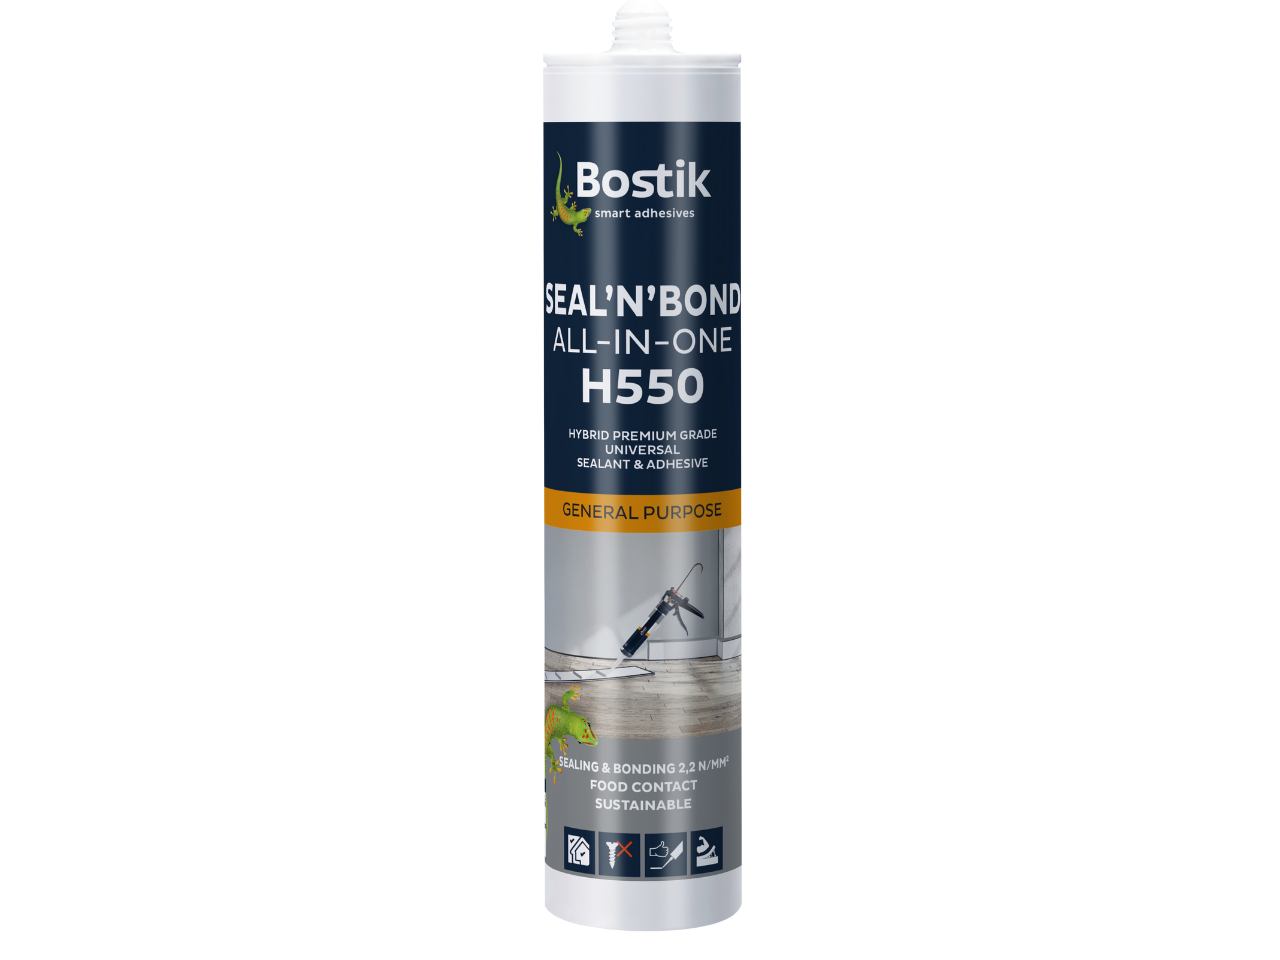 bostik-indonesia-product-image-h550.png